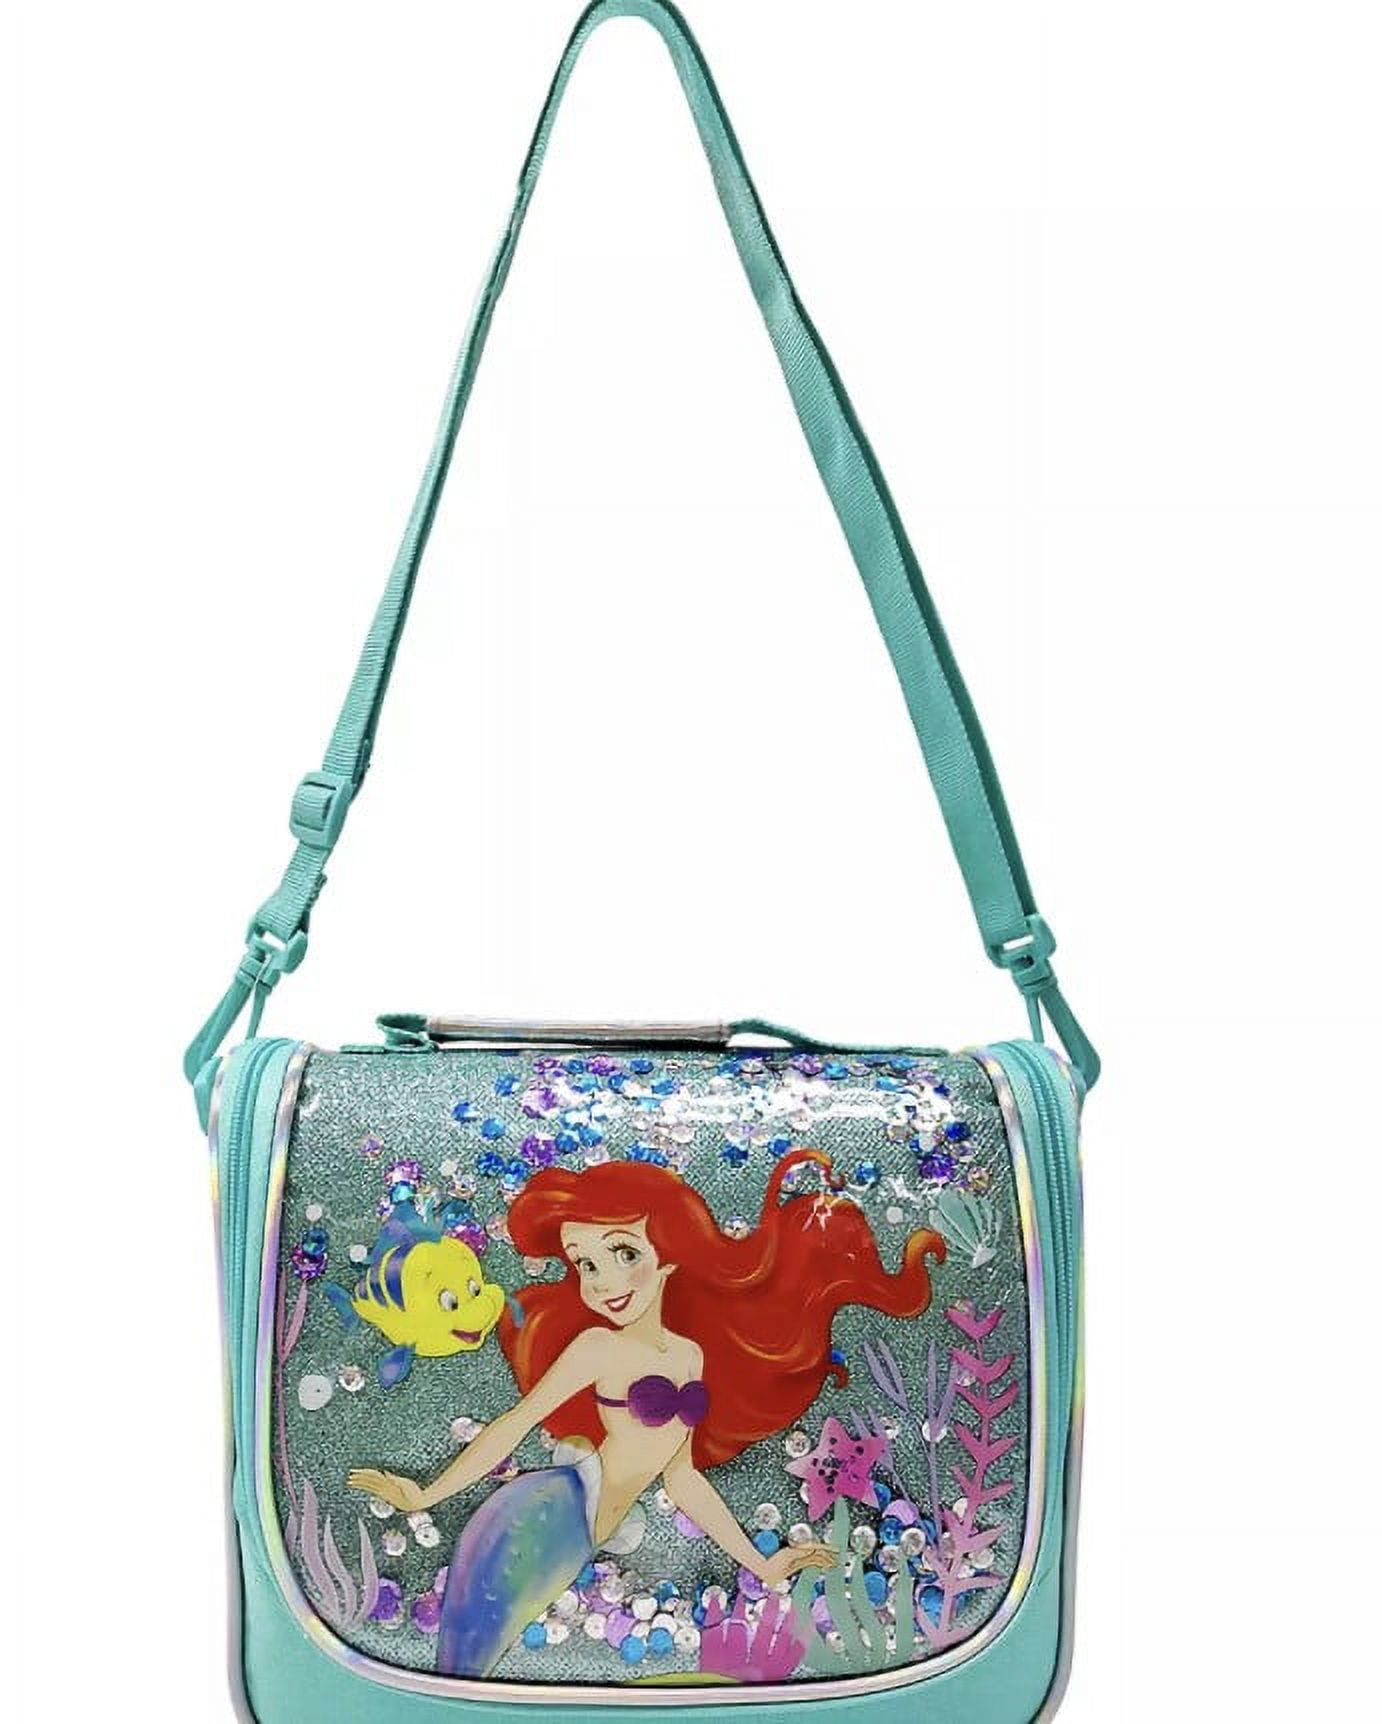 Celebrate Mermaid Day With 'The Little Mermaid' Purse from Loungefly -  AllEars.Net